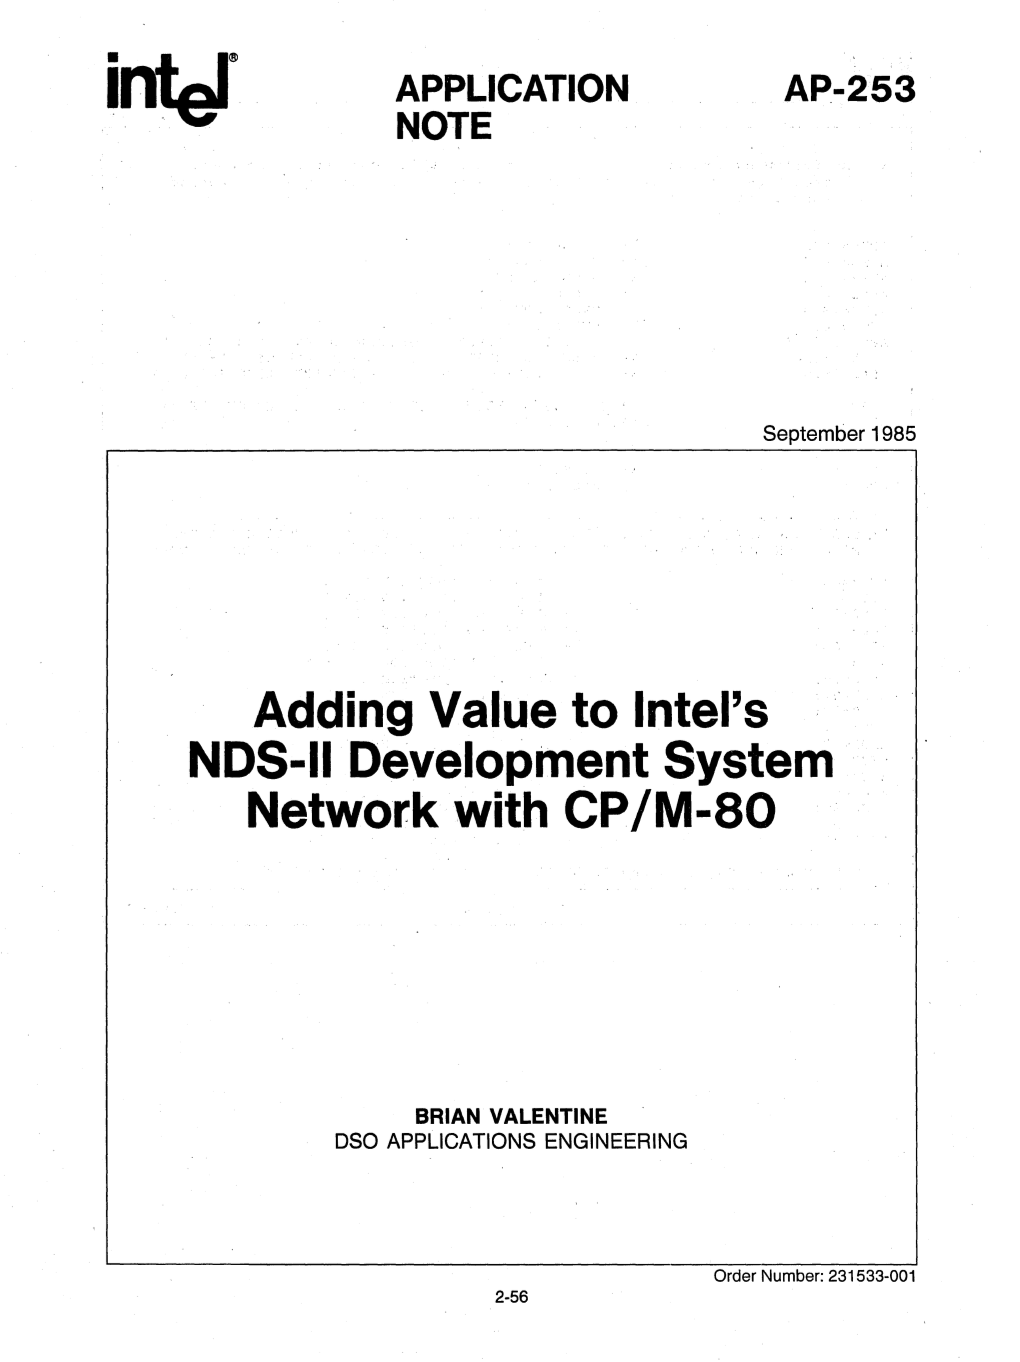 Adding Value to Intel's NOS-II Development System Network with CP IM-80